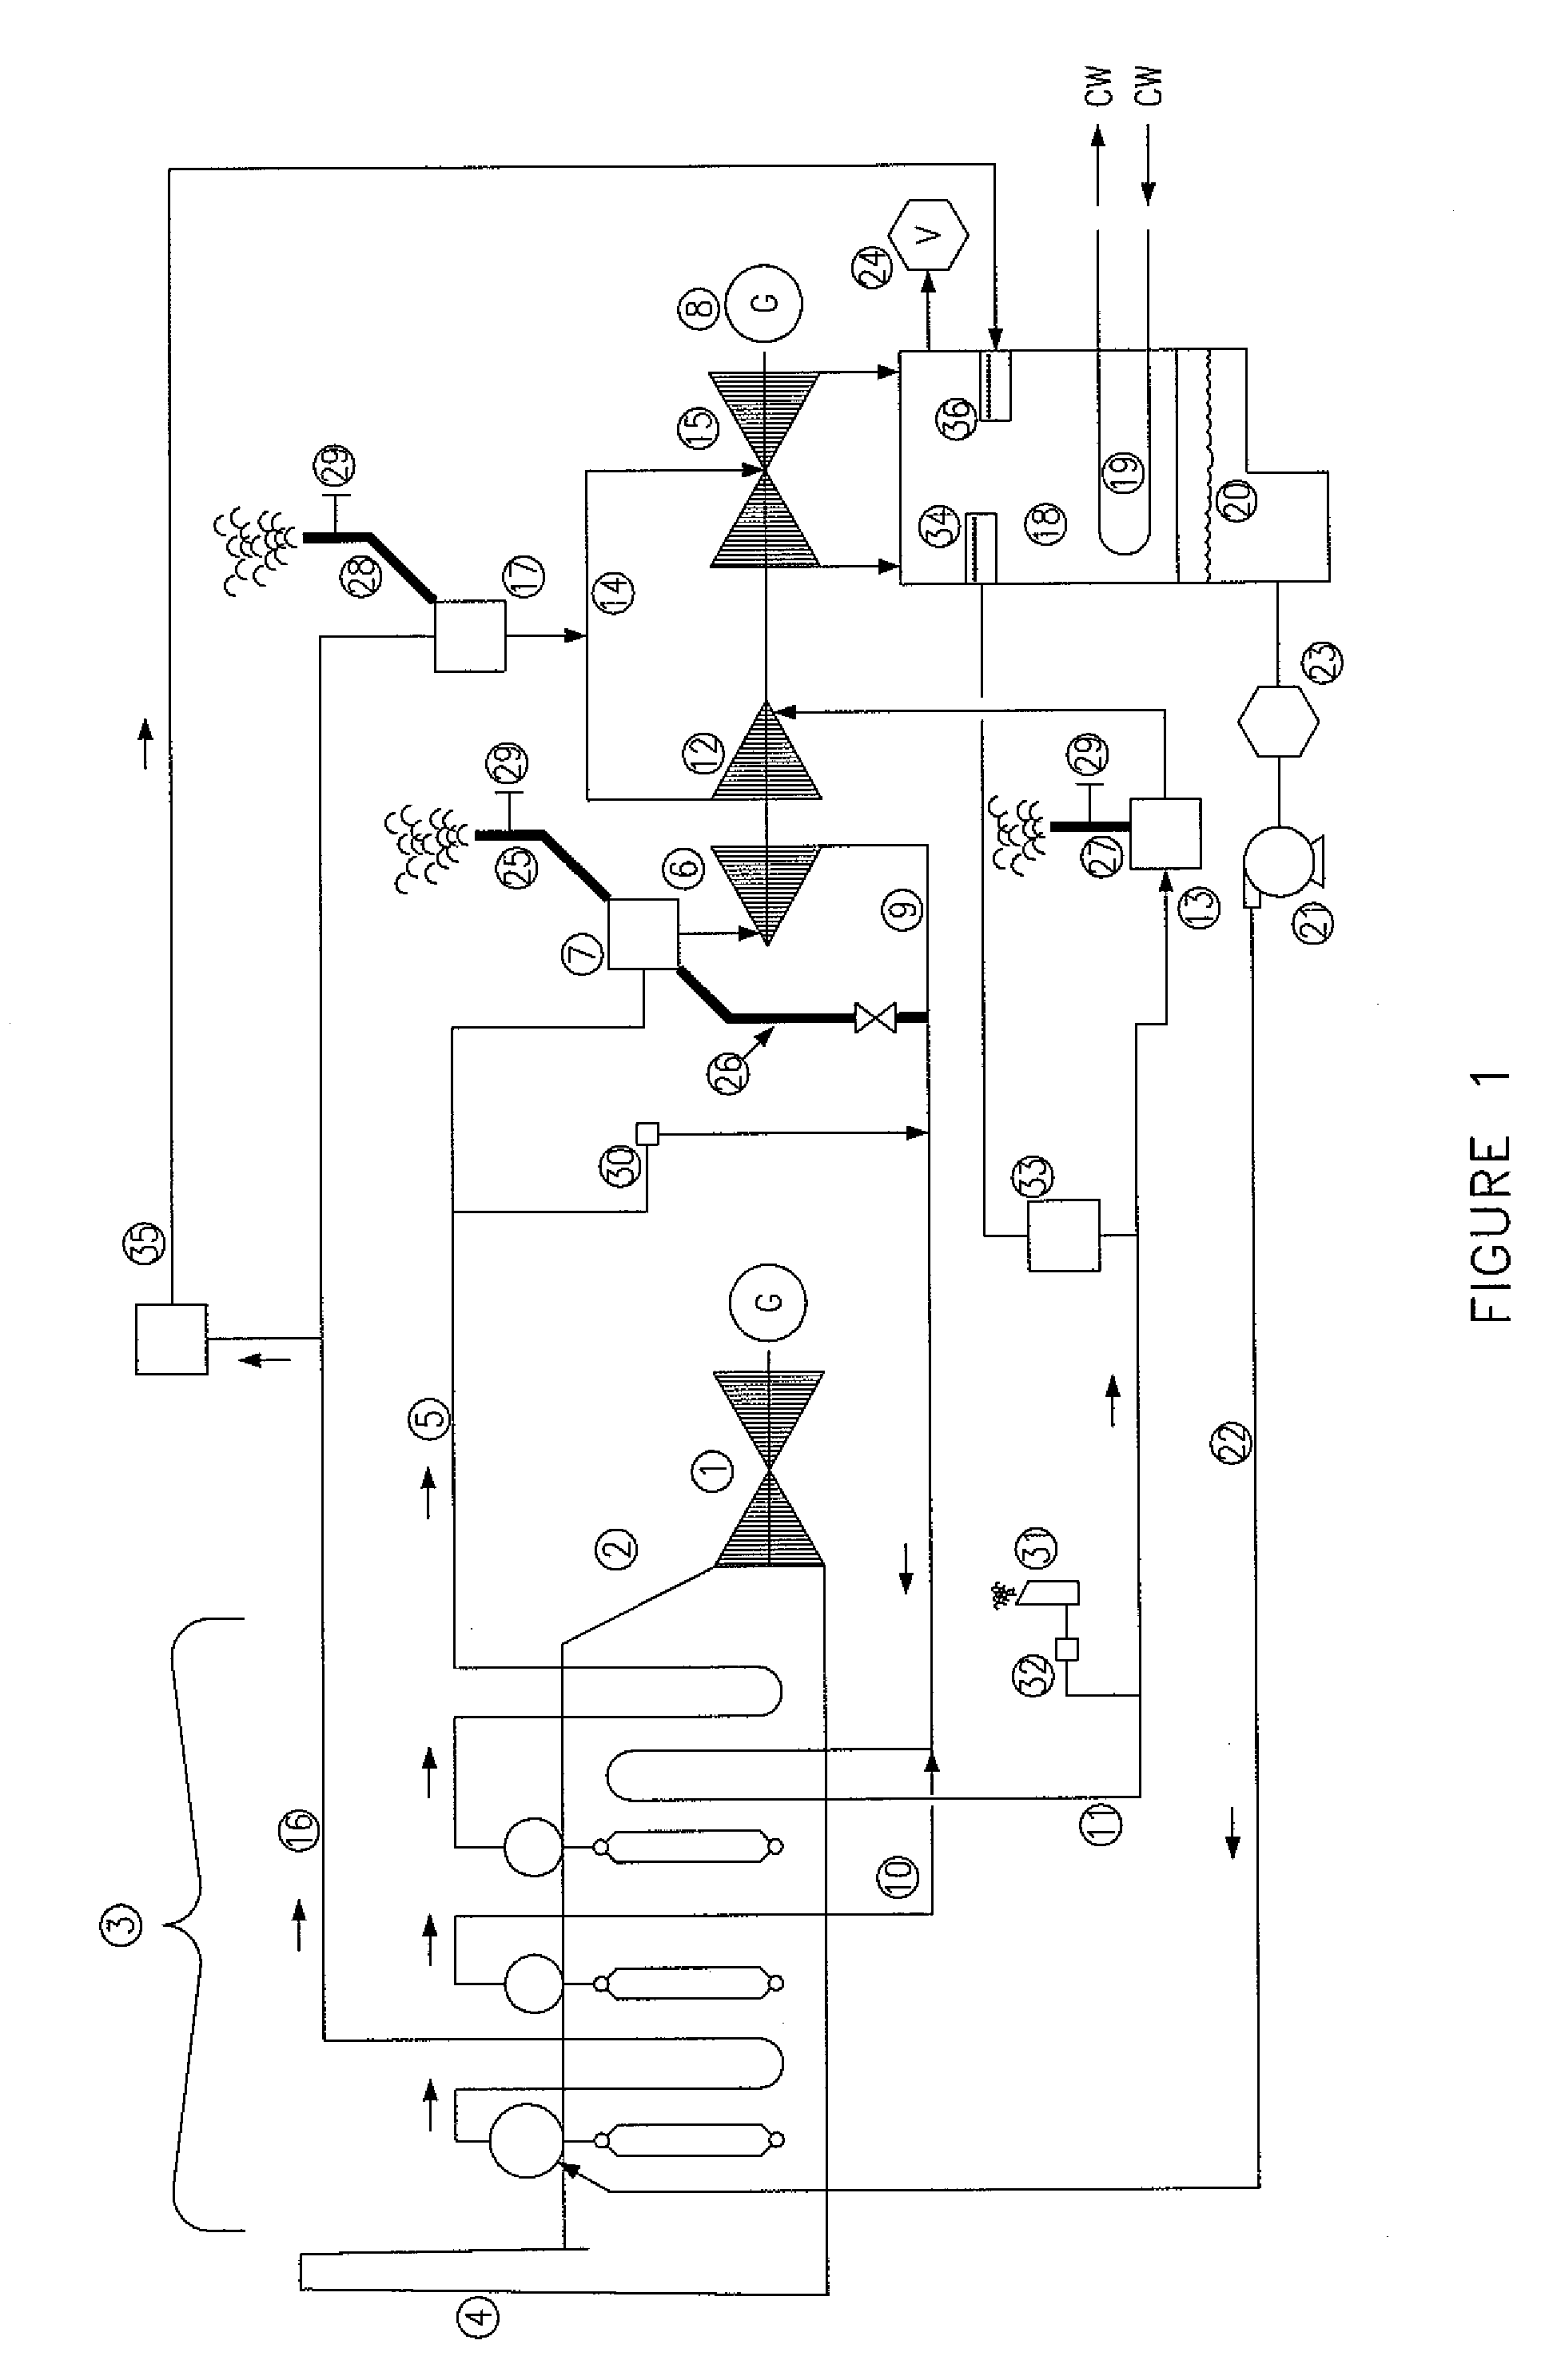 Method and apparatus for commissioning power plants